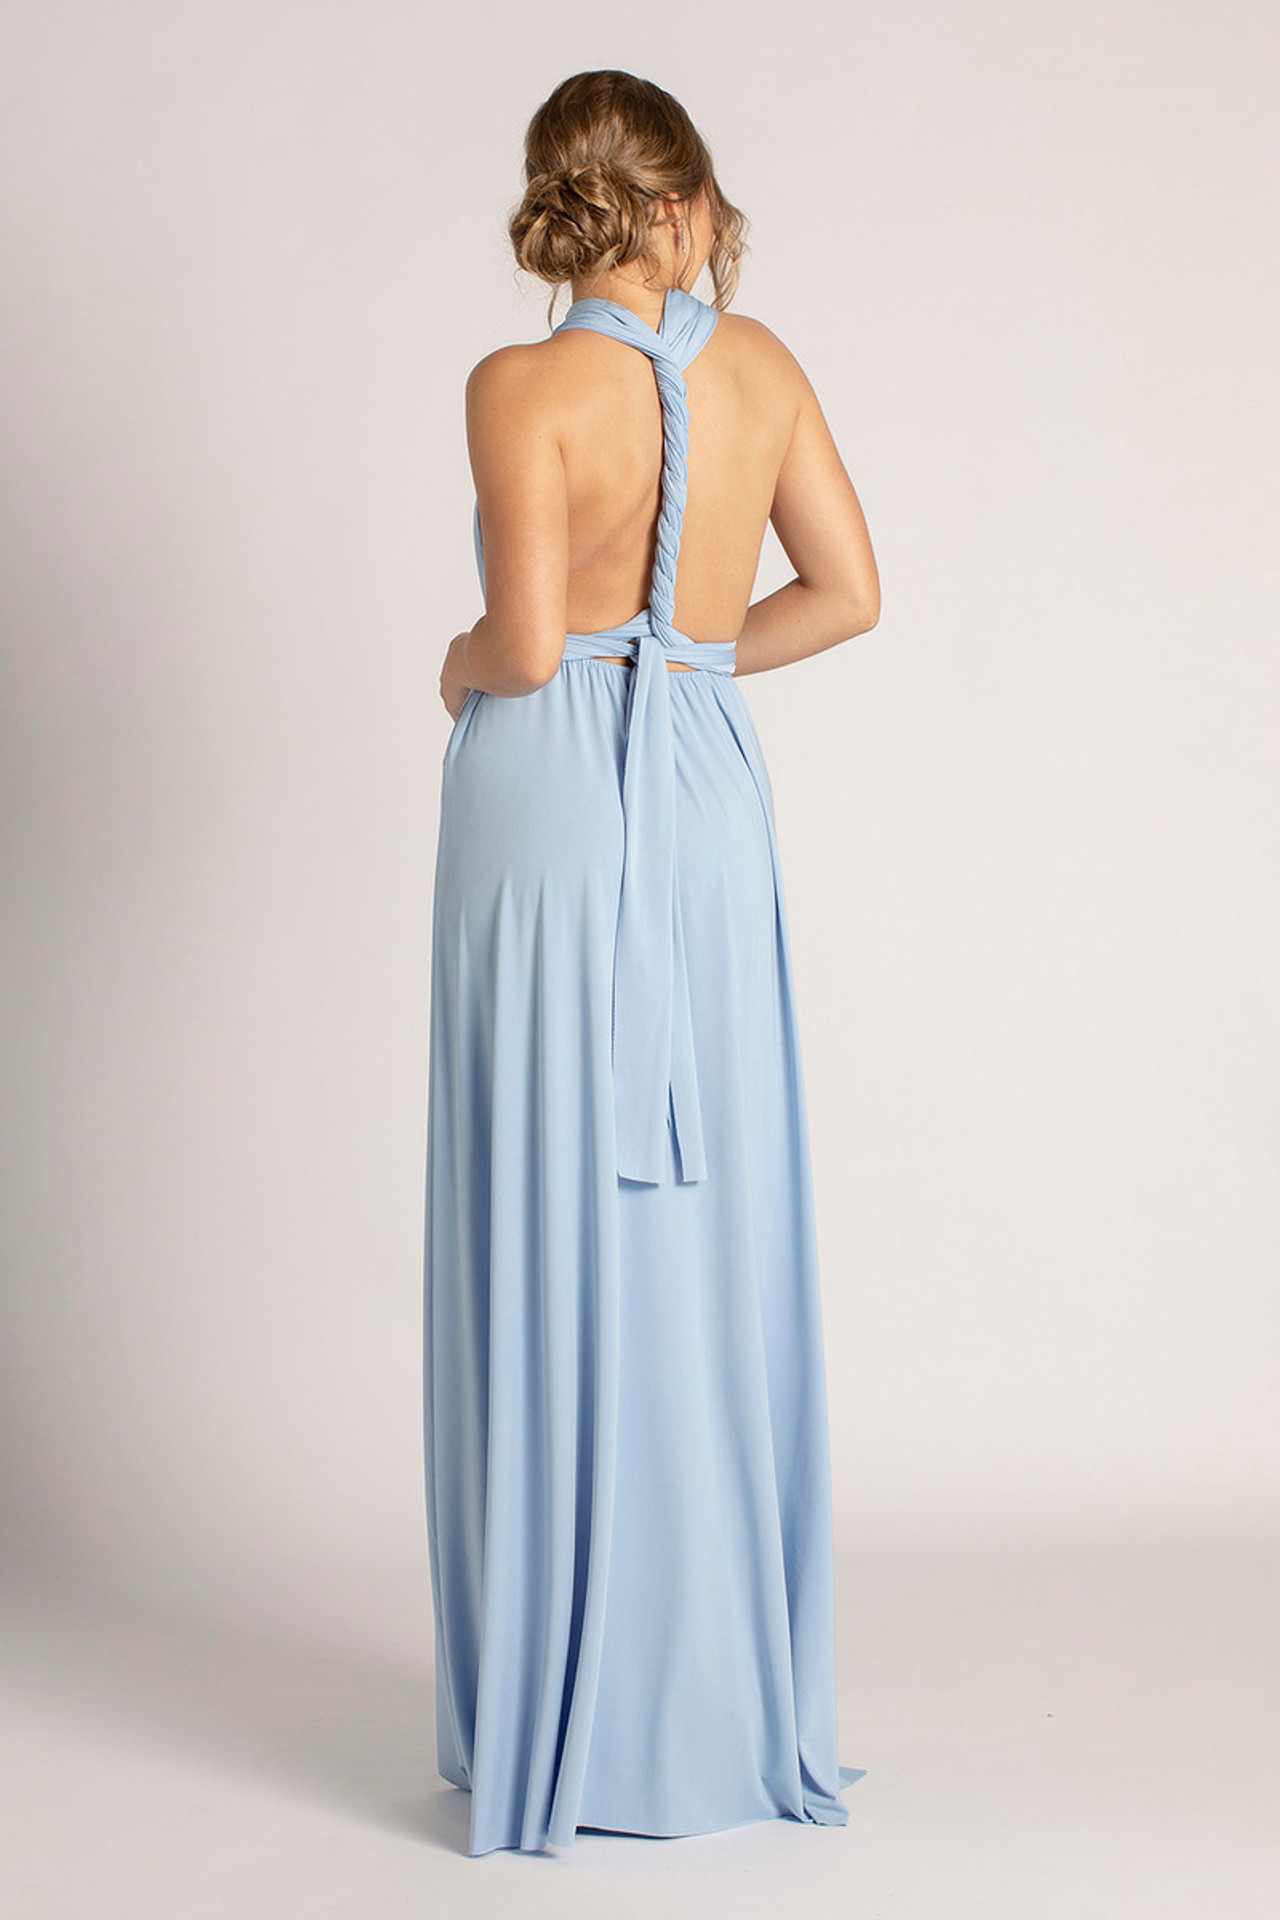 Classic Multiway Infinity Bridesmaid Dress in Cornflower Blue For Sale ...